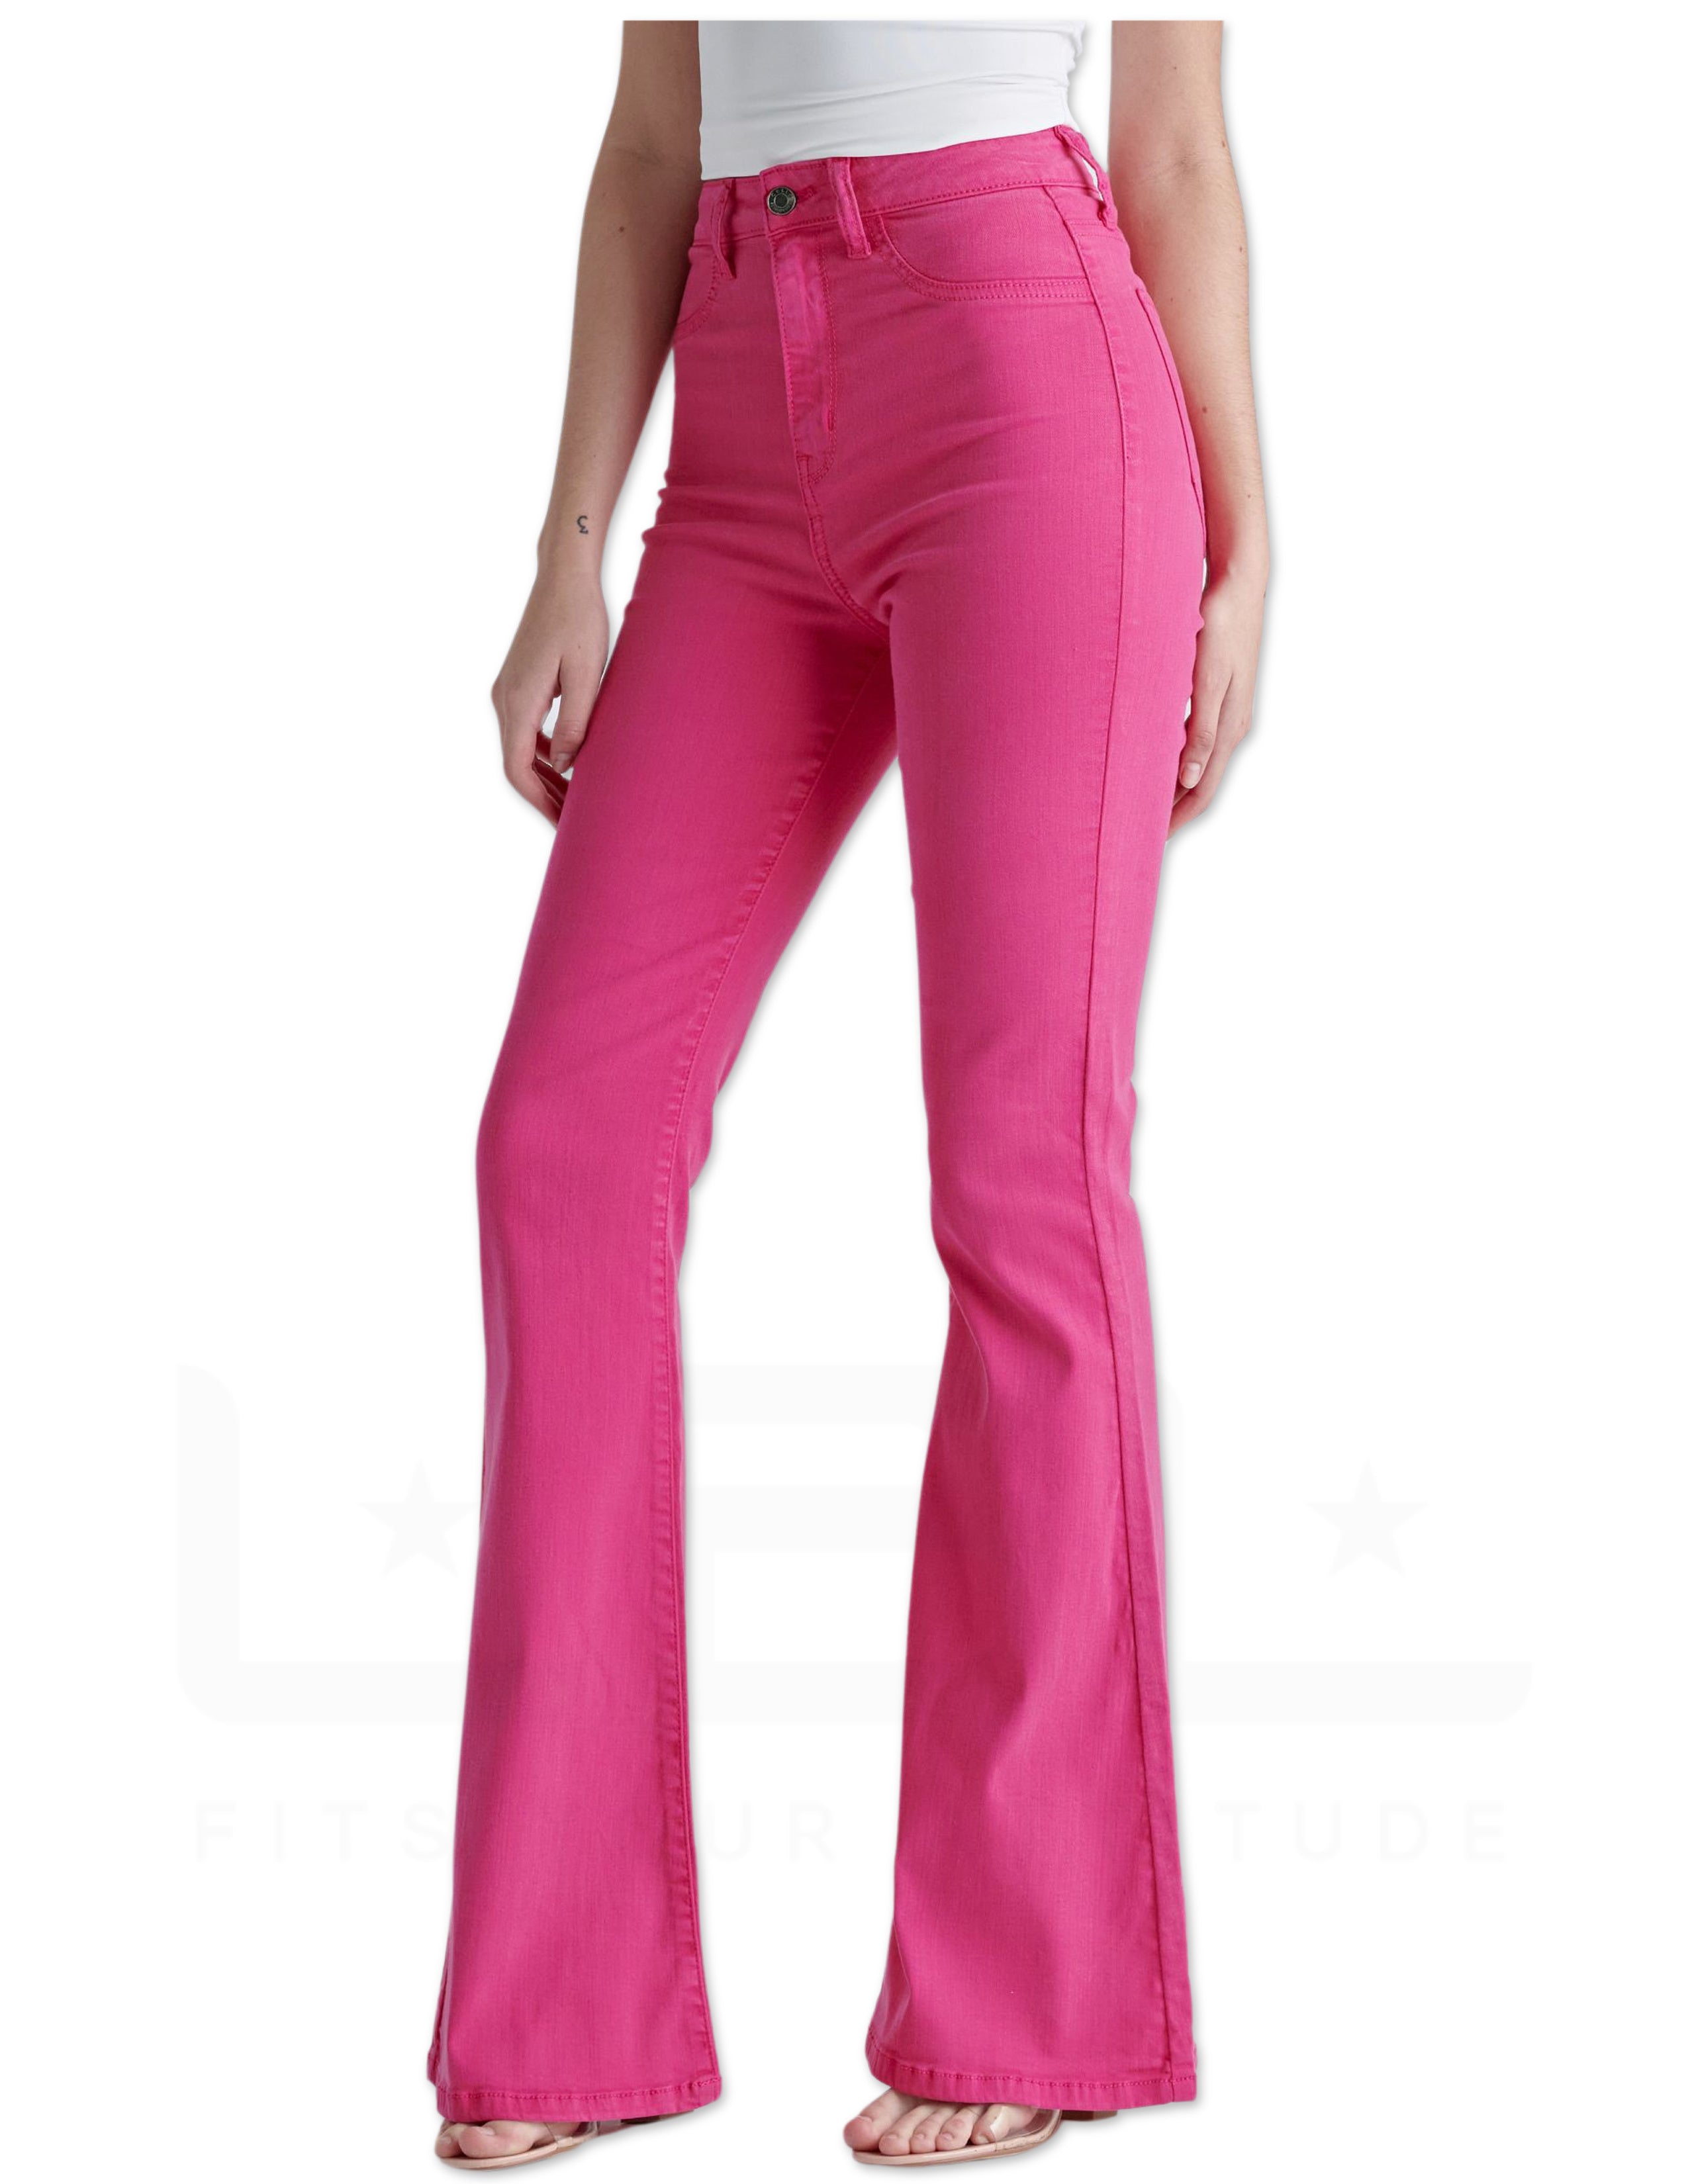 Back In-Stock! High Rise Super Flare Jeans - Barbie Pink